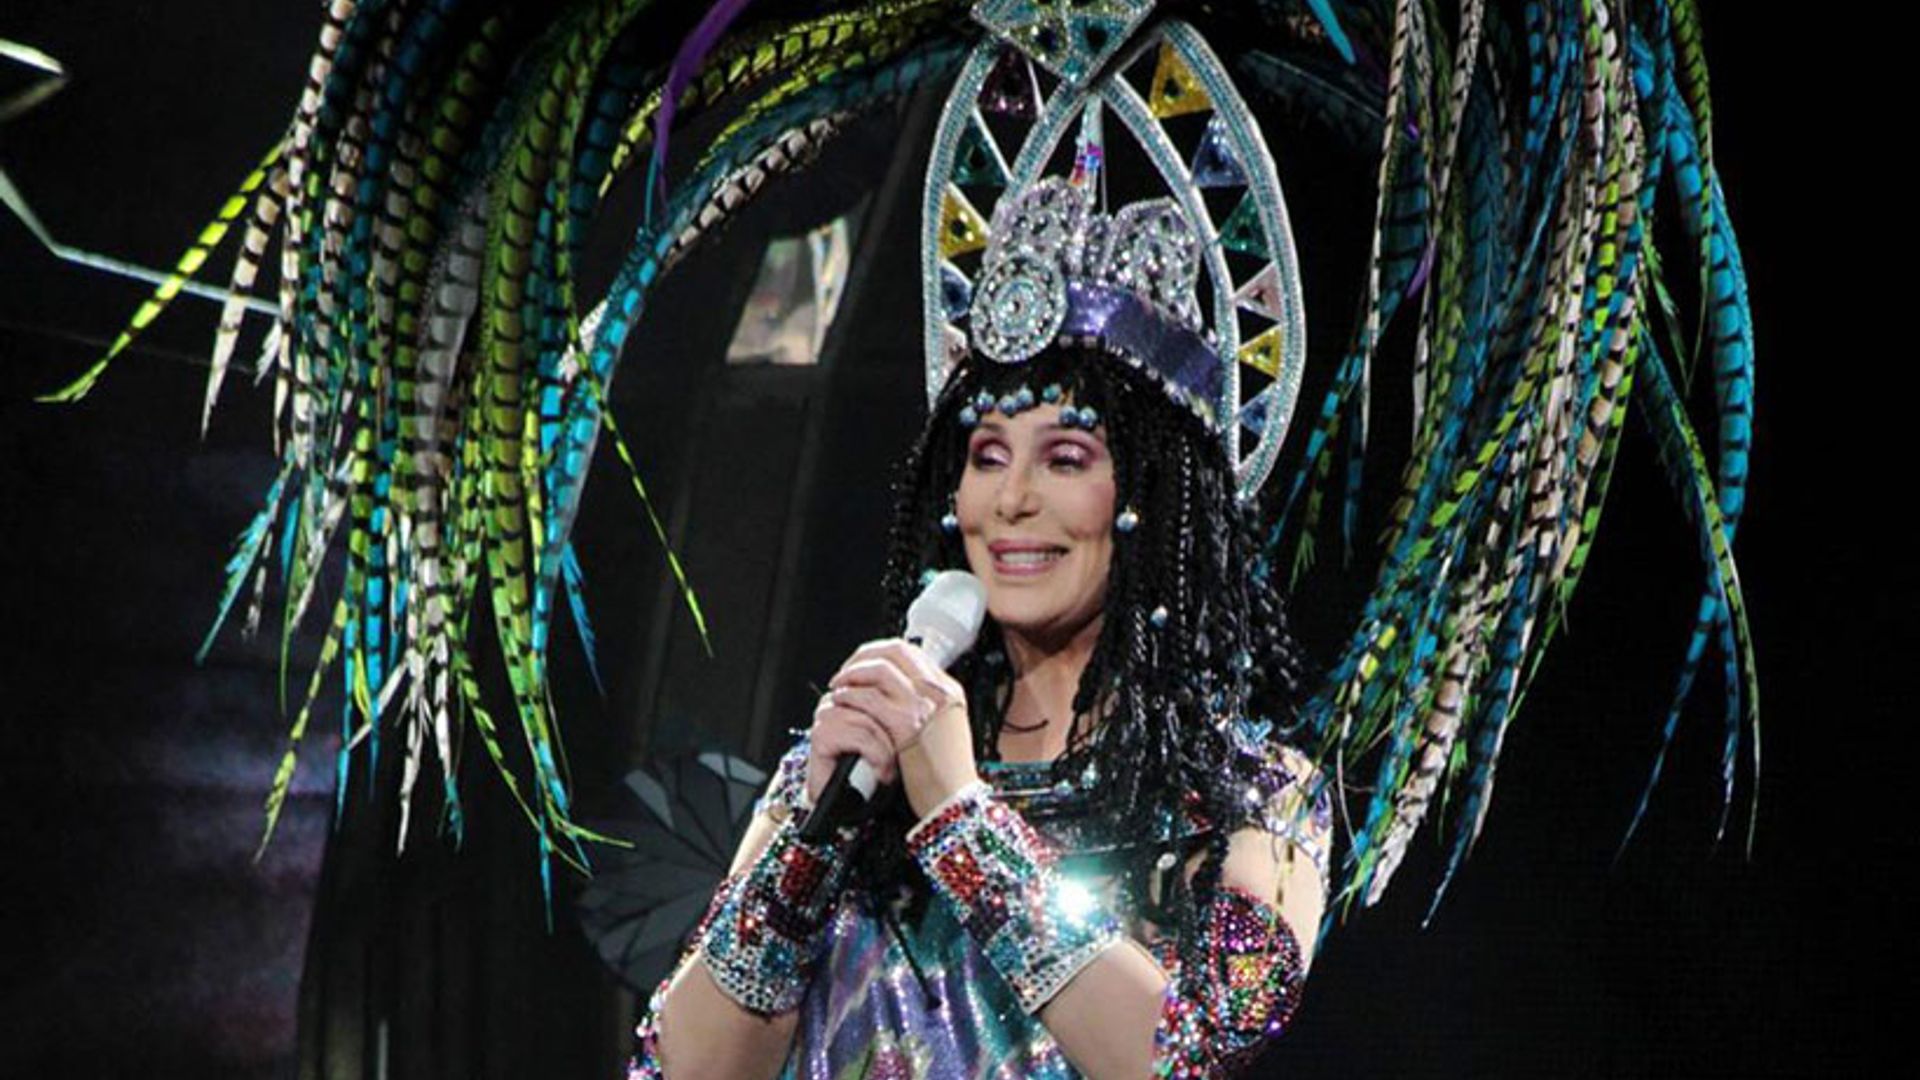 Cher locks costumes in temperature-controlled room for preservation